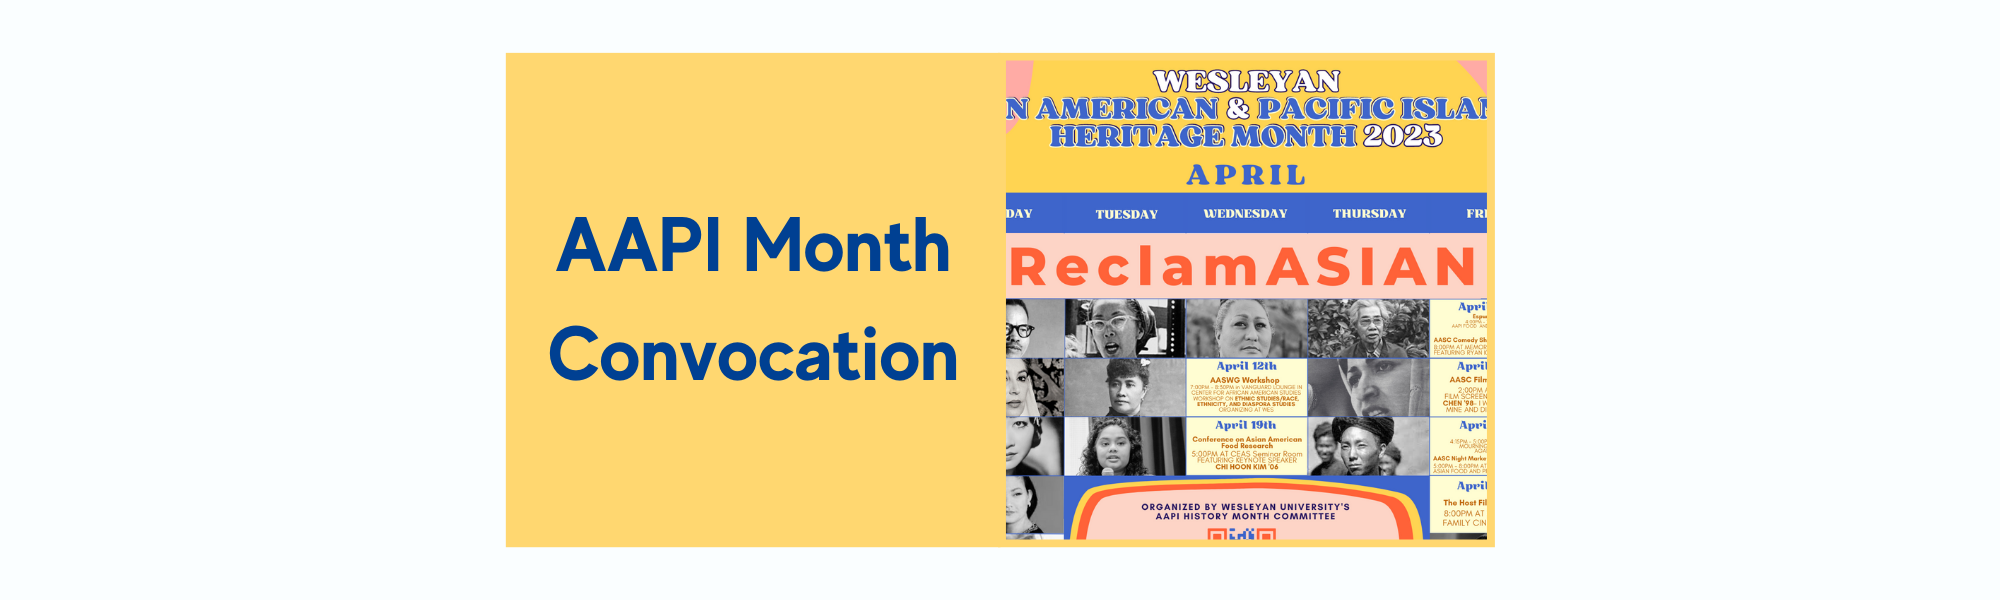 AAPI-Month-Convocation.png